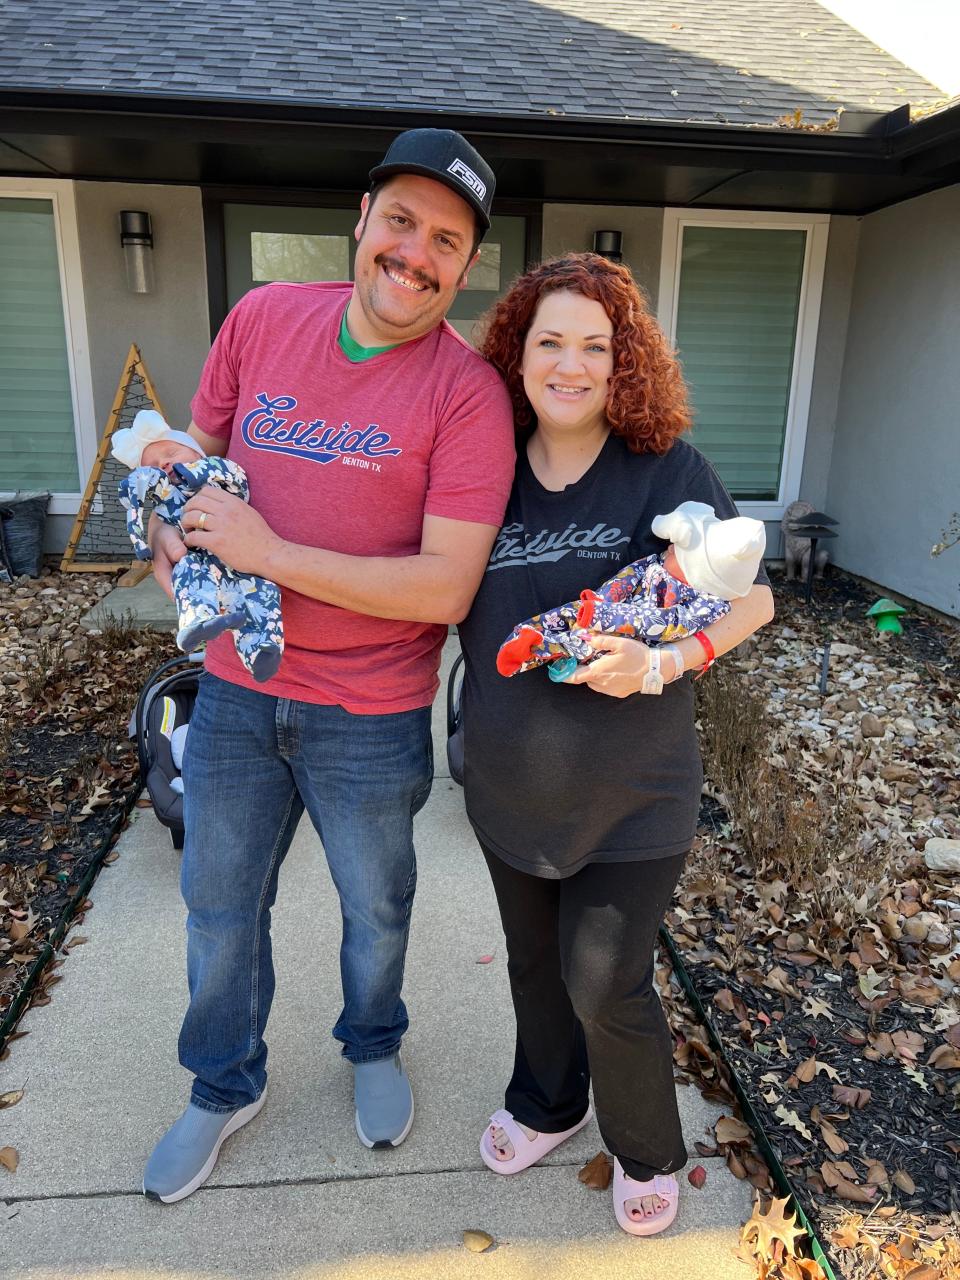 Cliff Scott, at left, and Kali Scott, at right, of Denton, Texas, at home Jan. 3, 2023 with their twins, Annie Jo, who was born on Dec. 31, 2022, and Effie Rose, who was born a few minutes later at 12:01 a.m. Jan. 1, 2023, at Texas Health Presbyterian Hospital Denton.